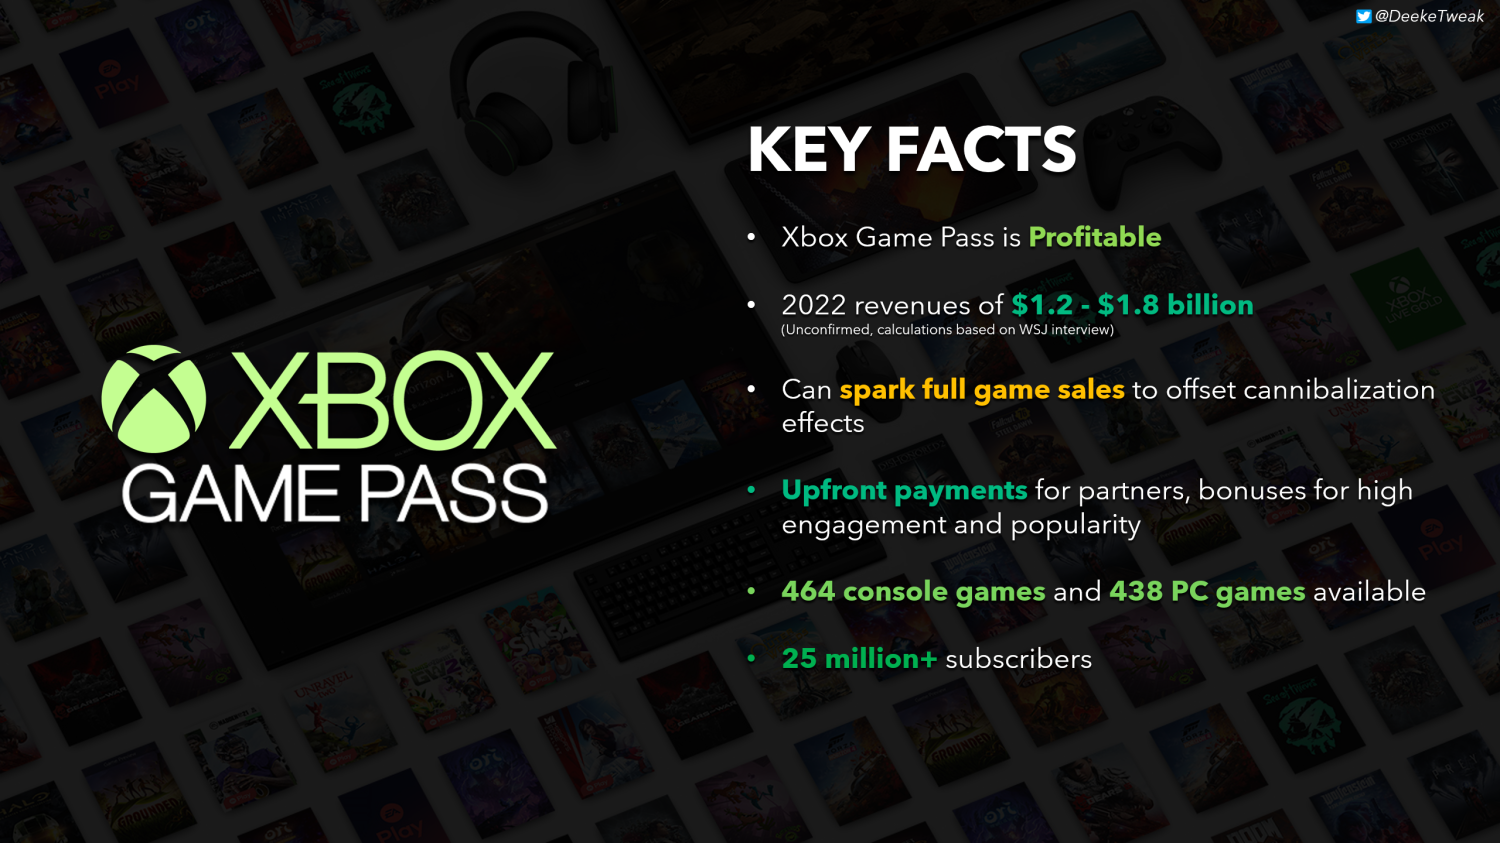 Phil Spencer: The Number of PC Game Pass Users Has Quadrupled in Japan